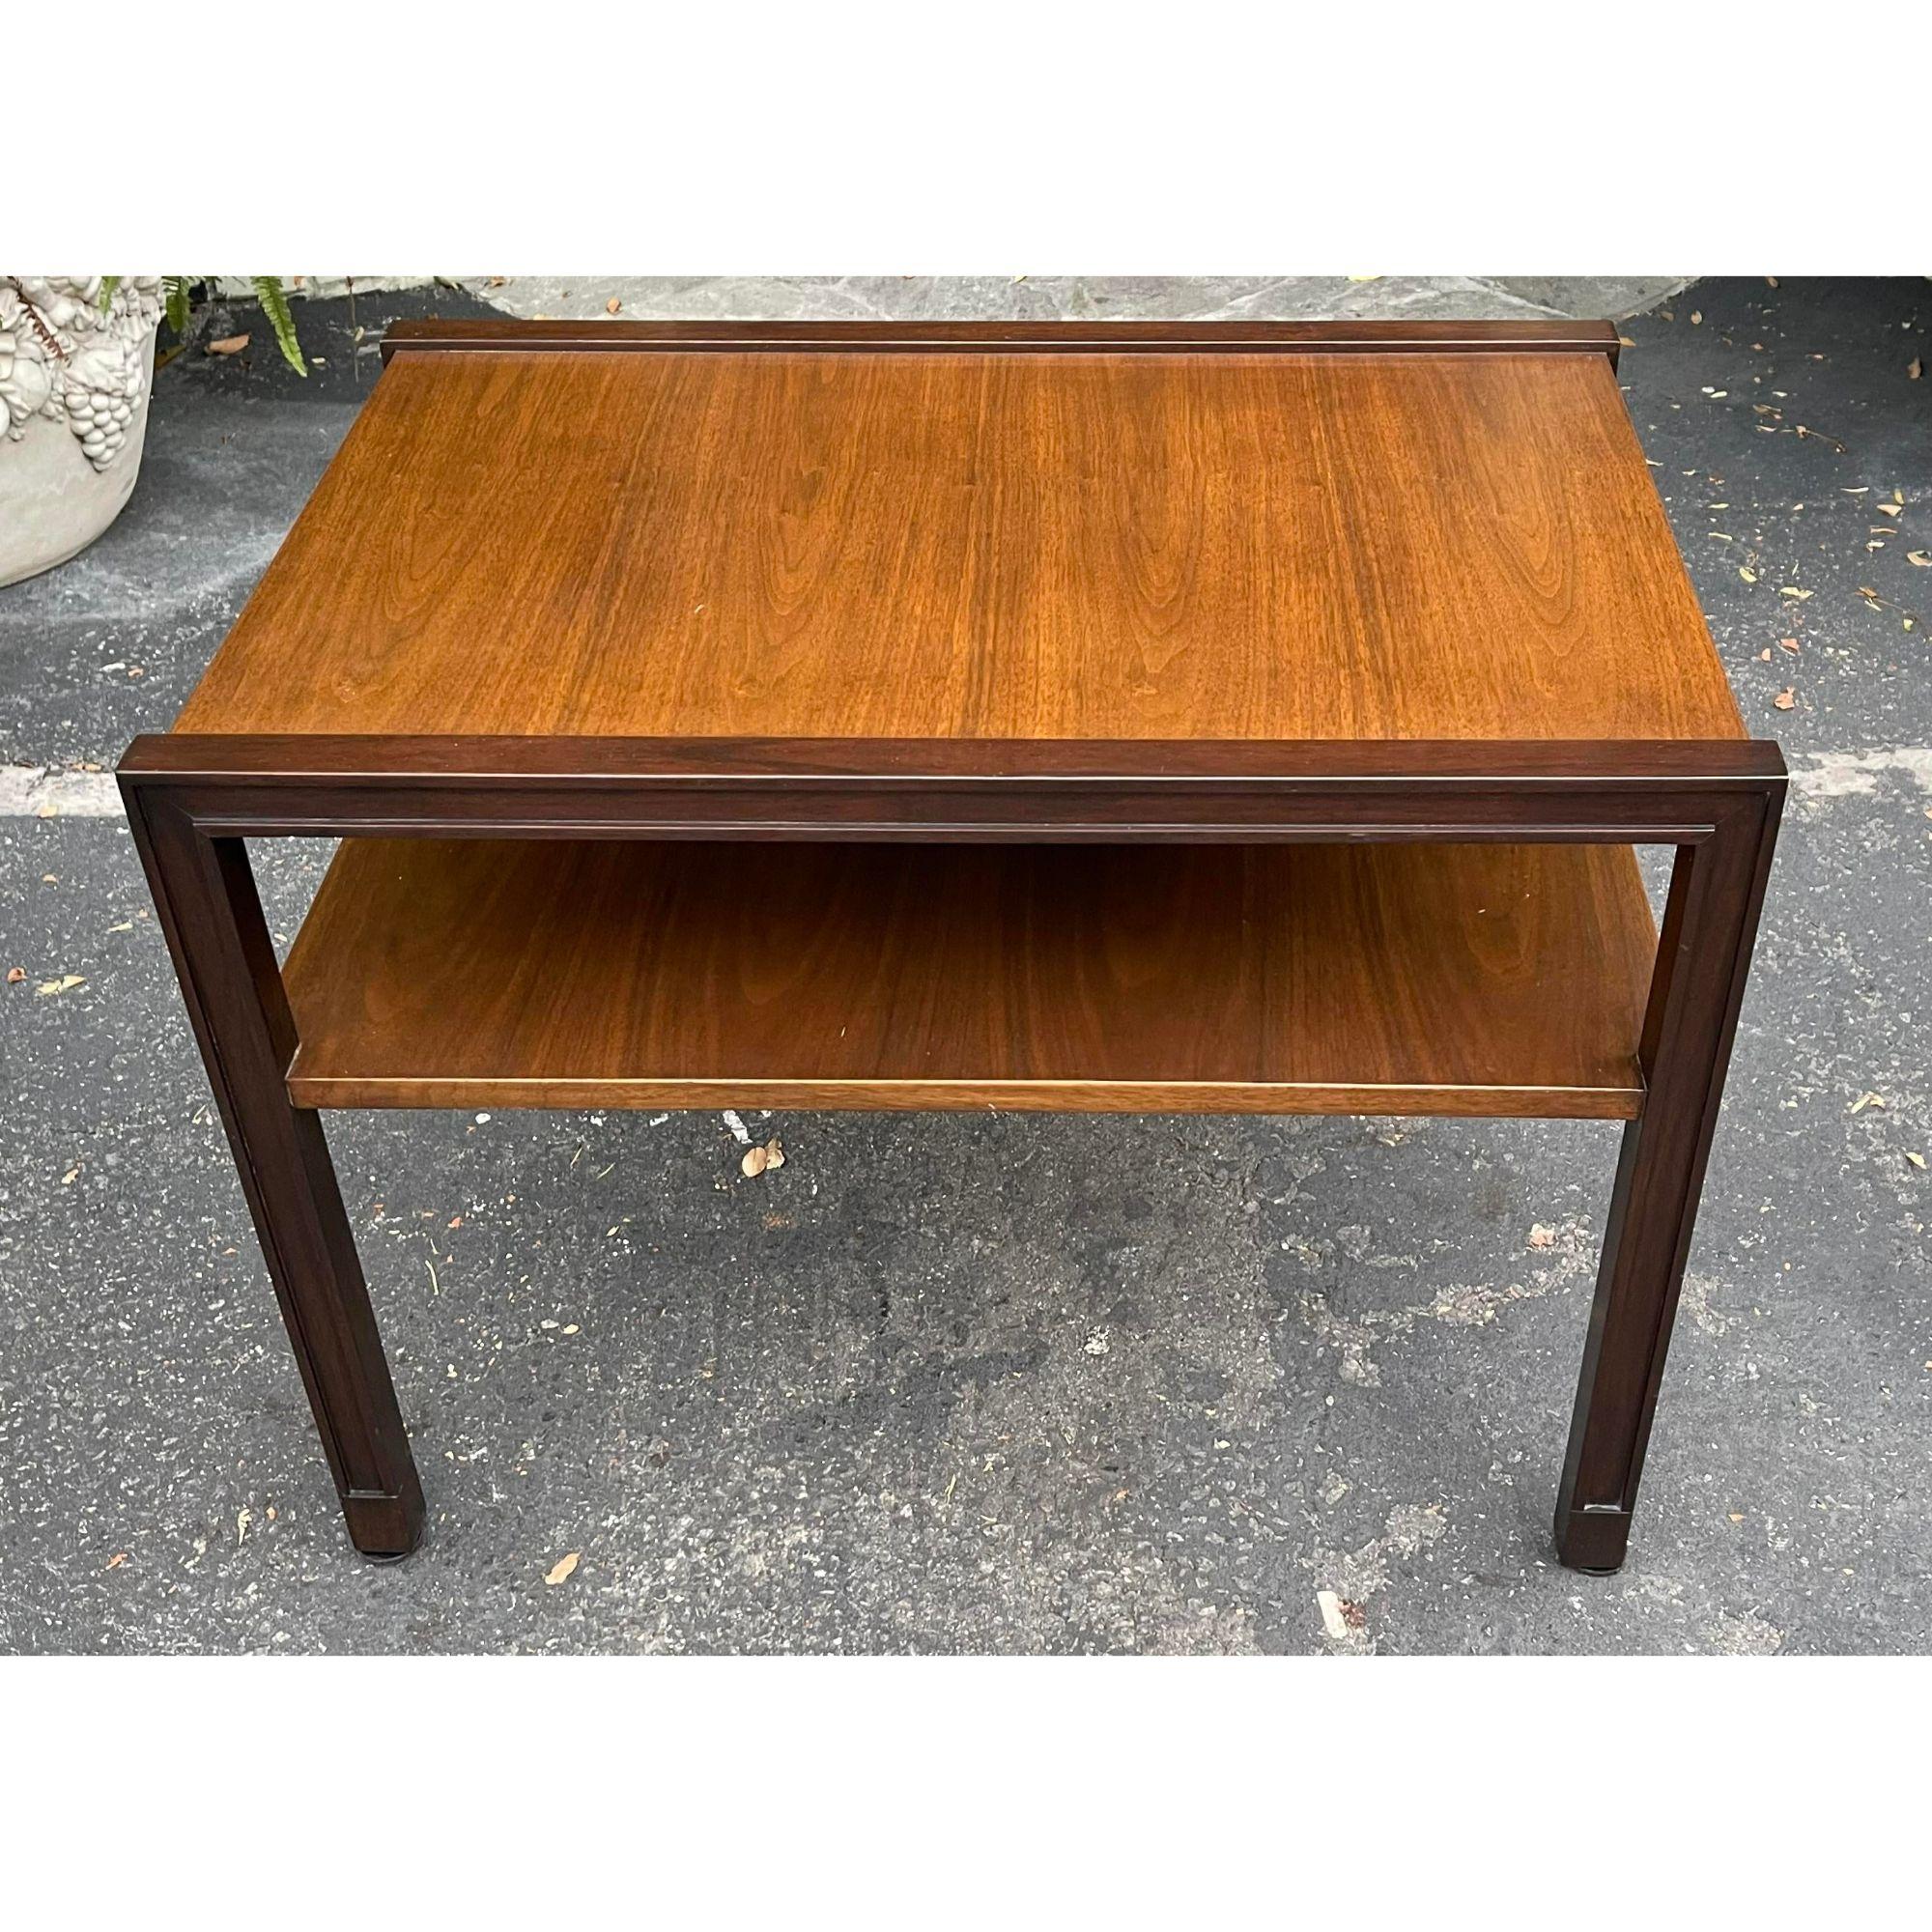 1960s Edward Wormley for Dunbar simple & elegant two tone side or end table

Additional information: 
Materials: Mahogany
Color: Brown
Brand: Dunbar Furniture
Designer: Edward Wormley
Period: 1960s
Styles: Mid-Century Modern
Table Shape: